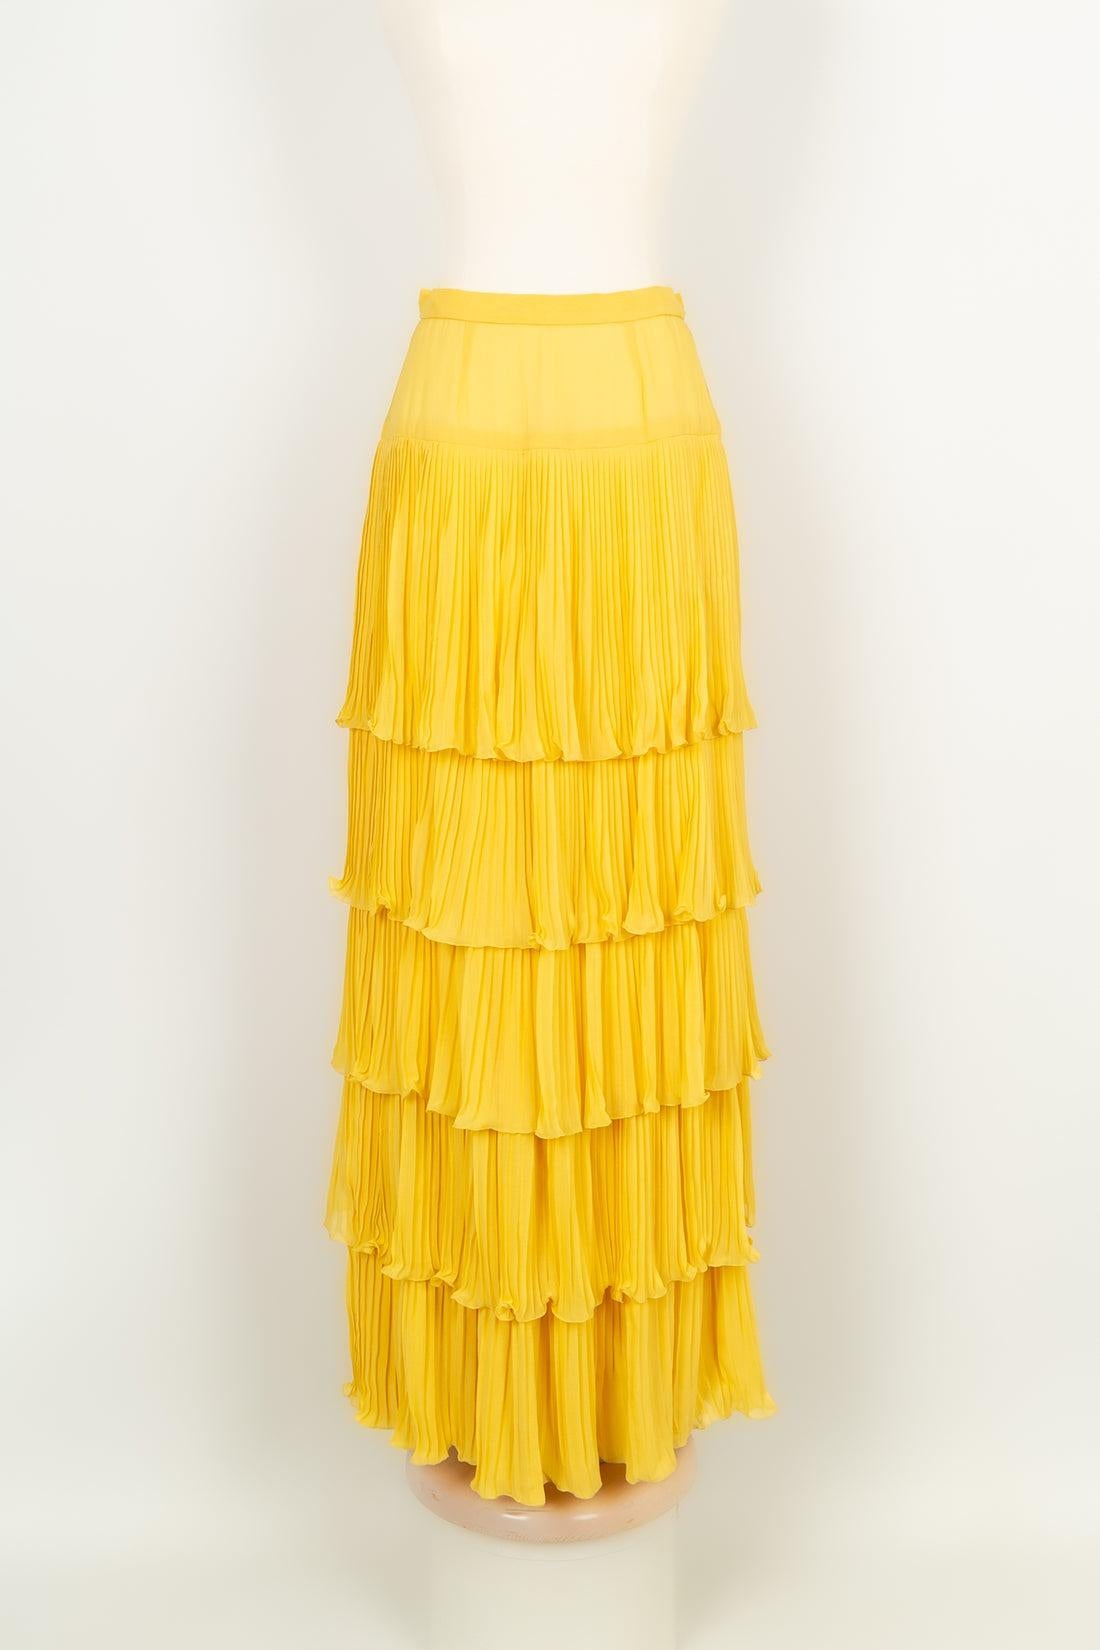 Valentino Set Haute Couture Pleated Skirt in Silk Crepe For Sale 3